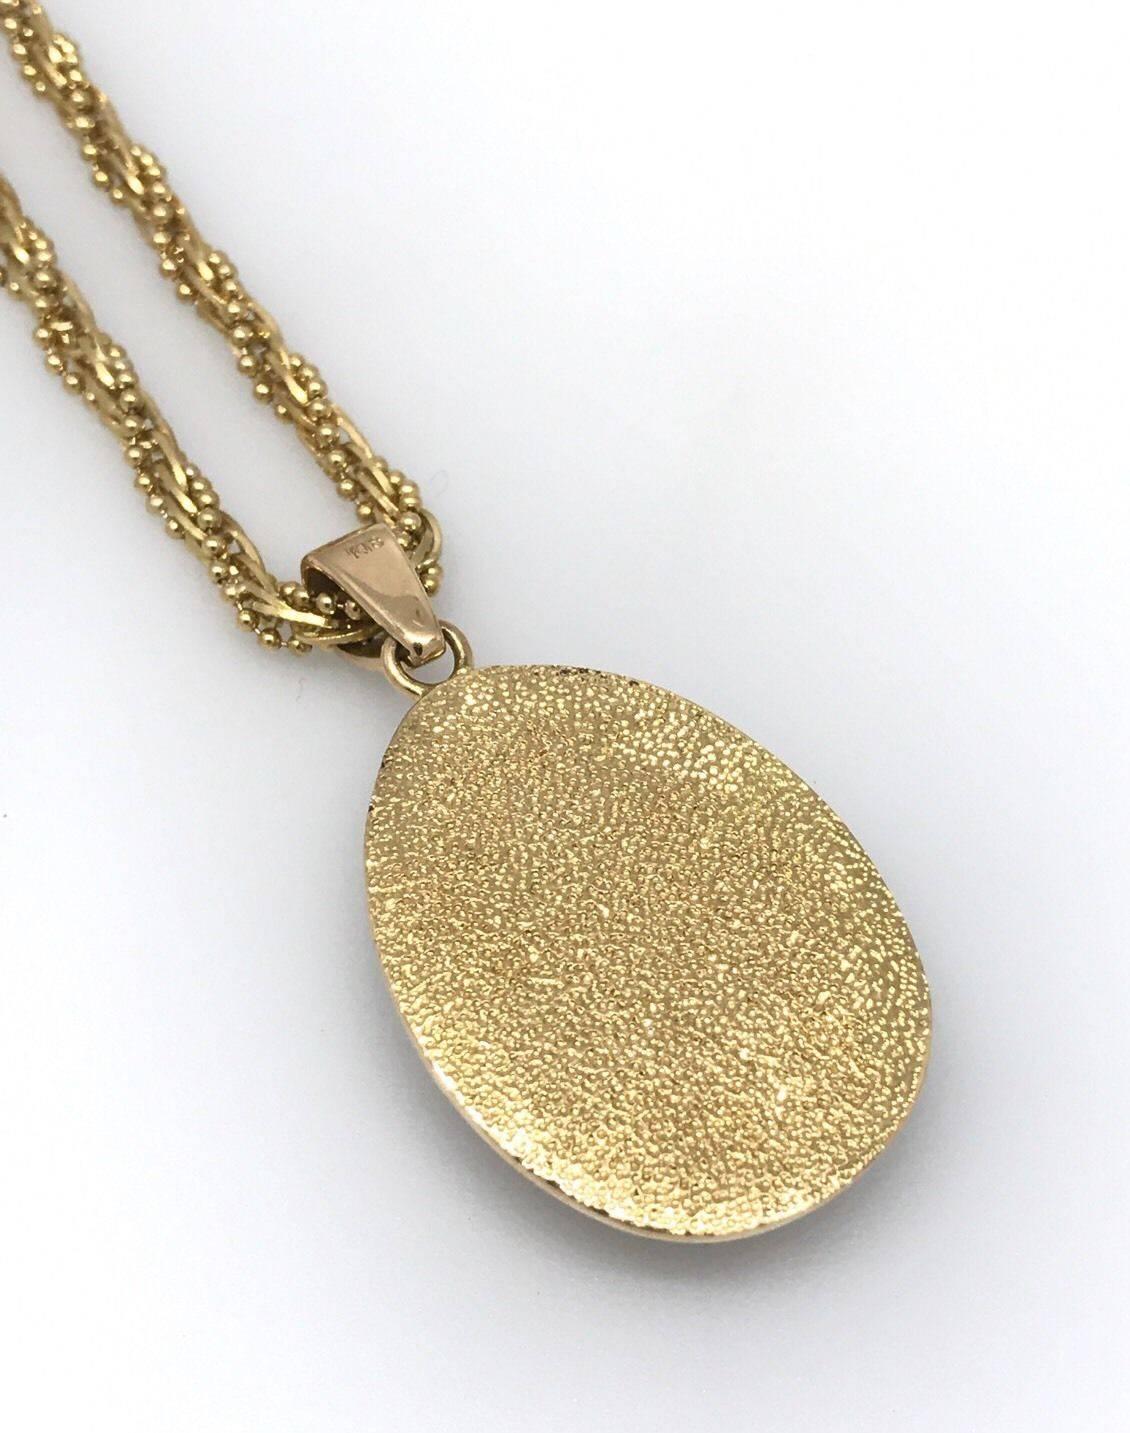 Teardrop Pave Diamond Pendant with Fancy Twist Chain in 18 Karat Yellow Gold In Excellent Condition For Sale In La Jolla, CA